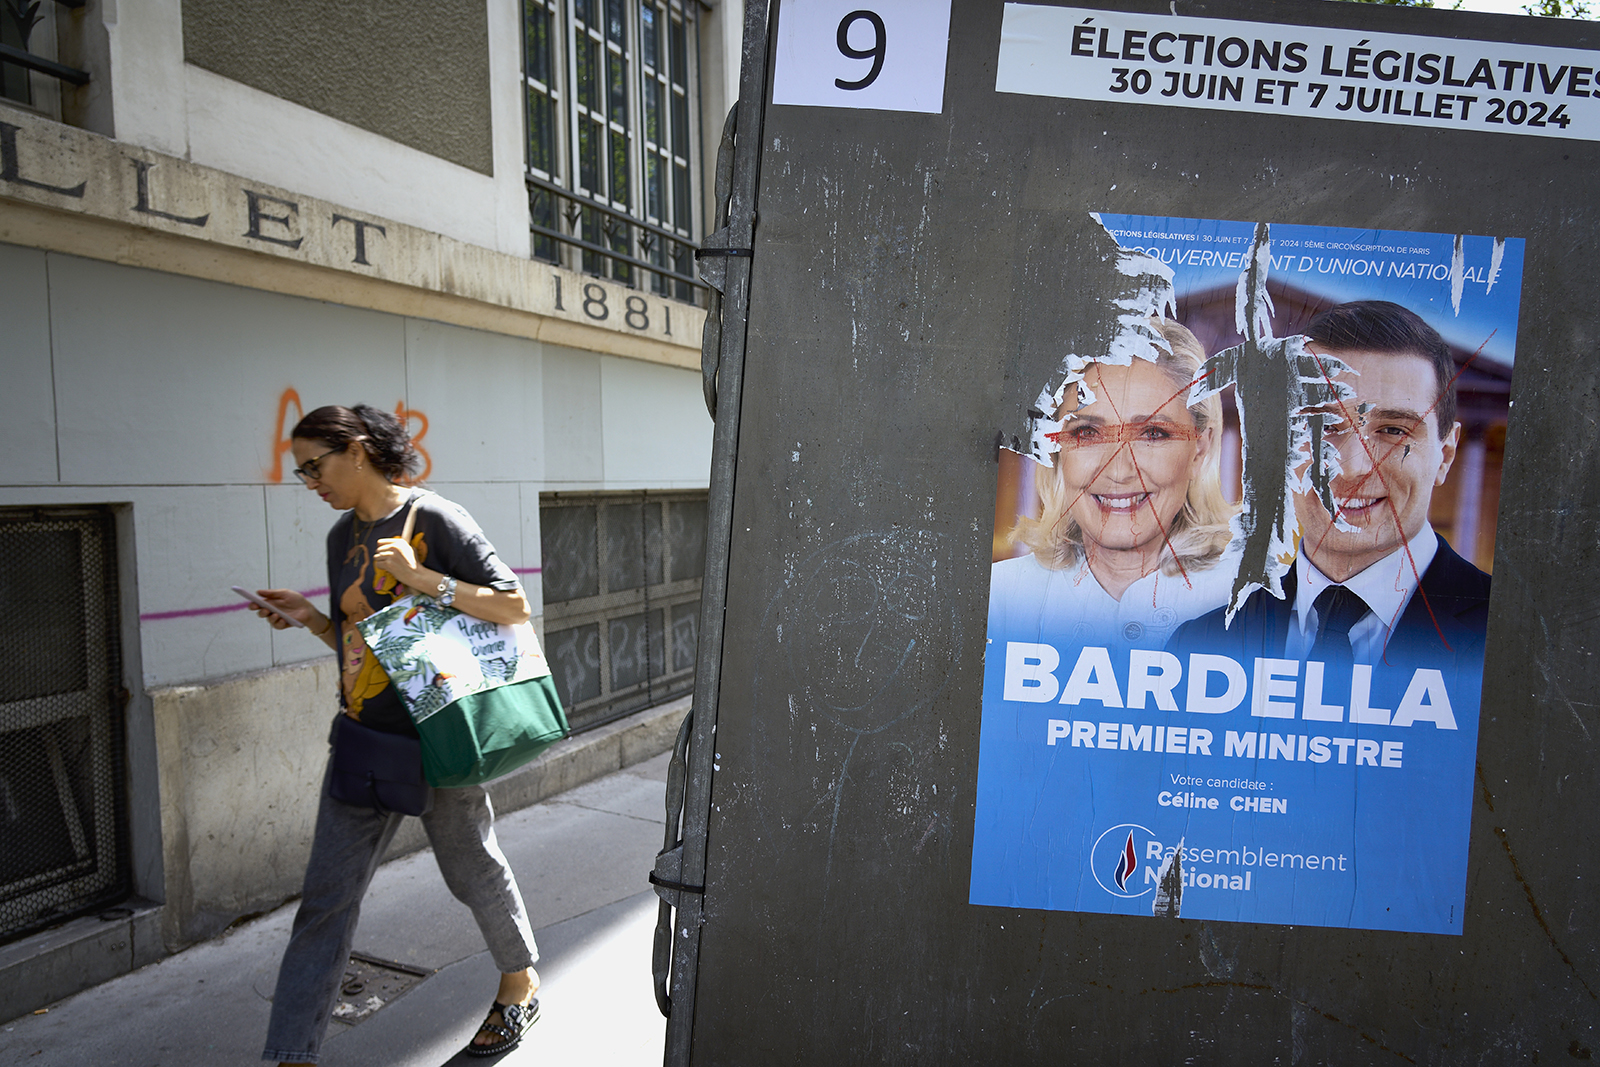 A woman passes a voting station with the electoral poster featuring the defaced photos of Marine le Pen and Jordan Bardella, of the far right party the Rassemblement National, or National Rally in the 10th arrondissement on June 23, 2024 in Paris, France. Posters with images of the candidates for the legislative elections are being put up in front of various voting stations, such as public schools and other municipality buildings. The first round of voting will take place on June 30th 2024, followed a week later by the second round of voting on July 7th 2024. These elections are the result of the decision of the French president, Emmanuel Macron, to dissolve parliament after gains by the far-right party Rassemblement National, or National Rally during the recent European elections. Photo by Remon Haazen/Getty Images